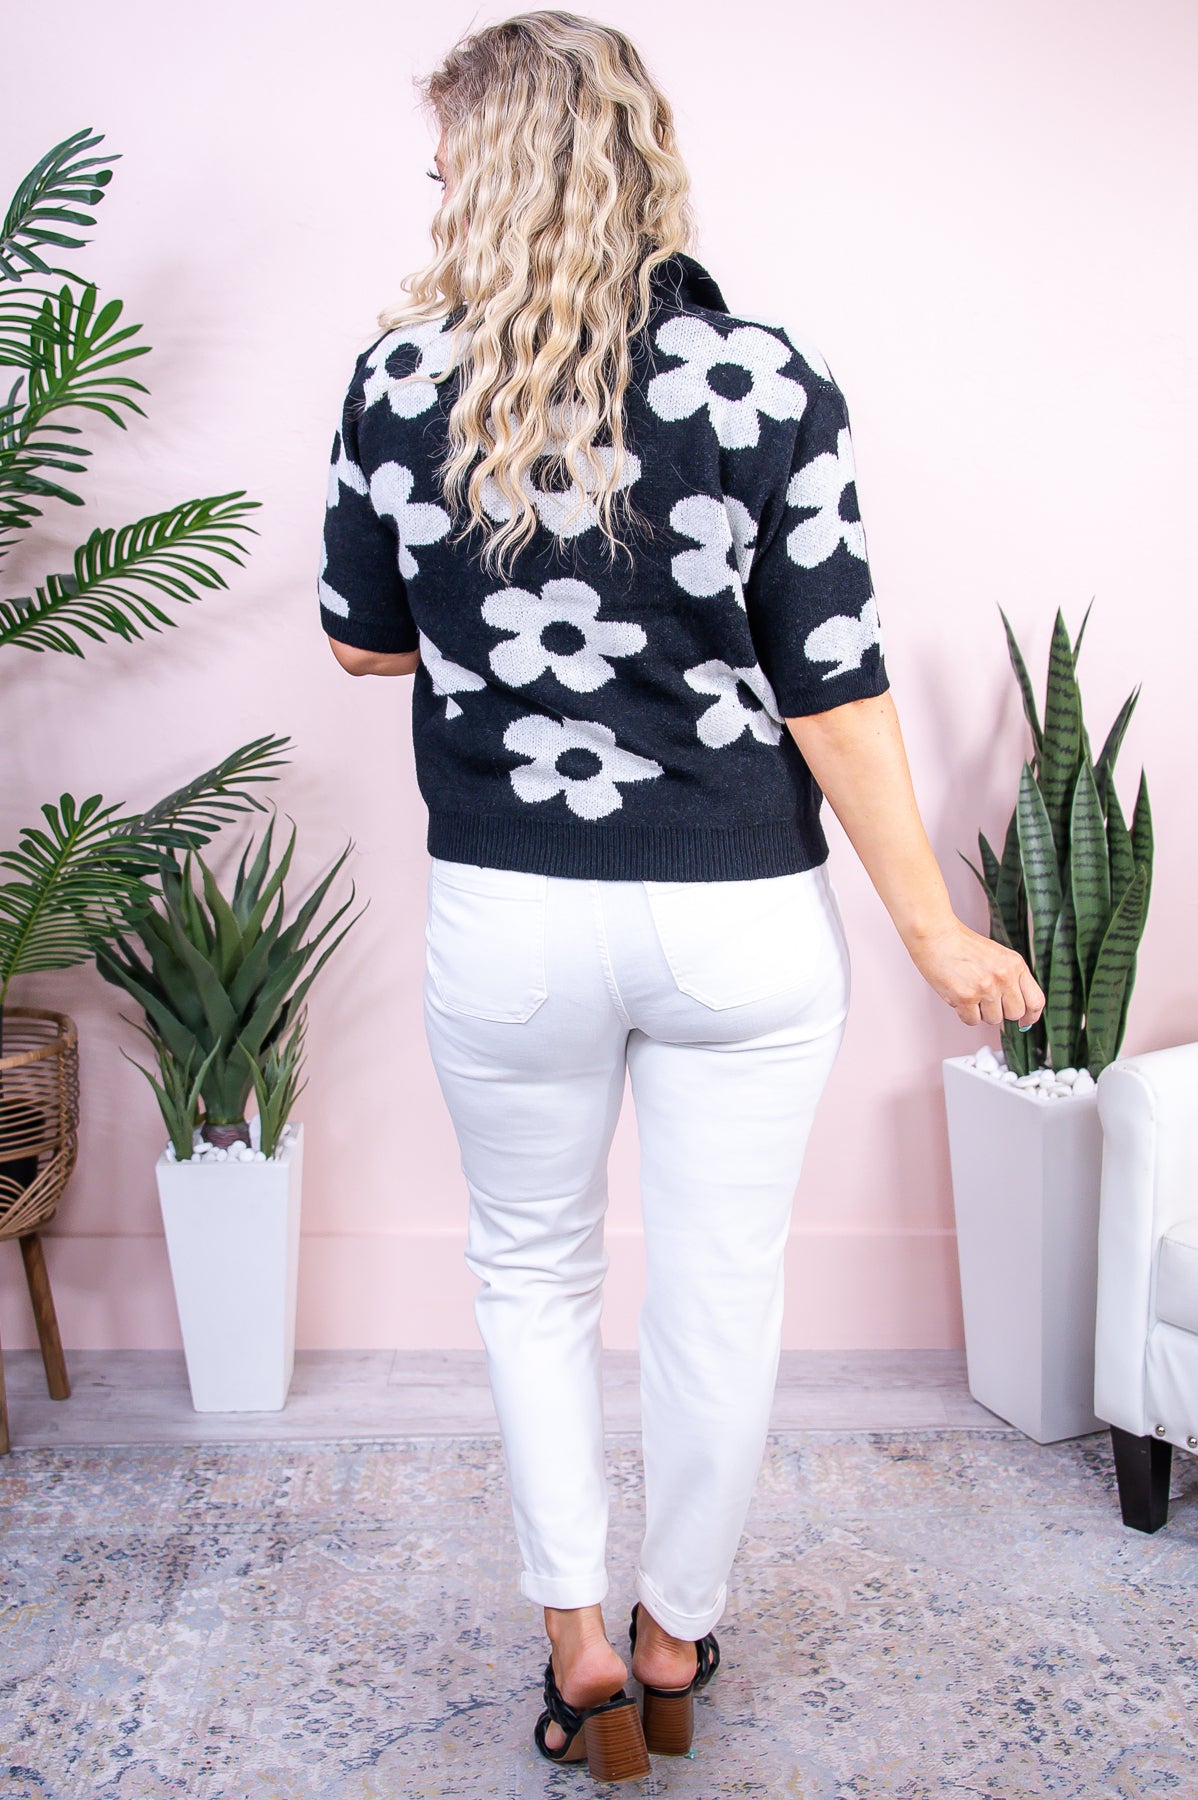 Cue The Shine Black/White Floral Knitted Top - T9546BK